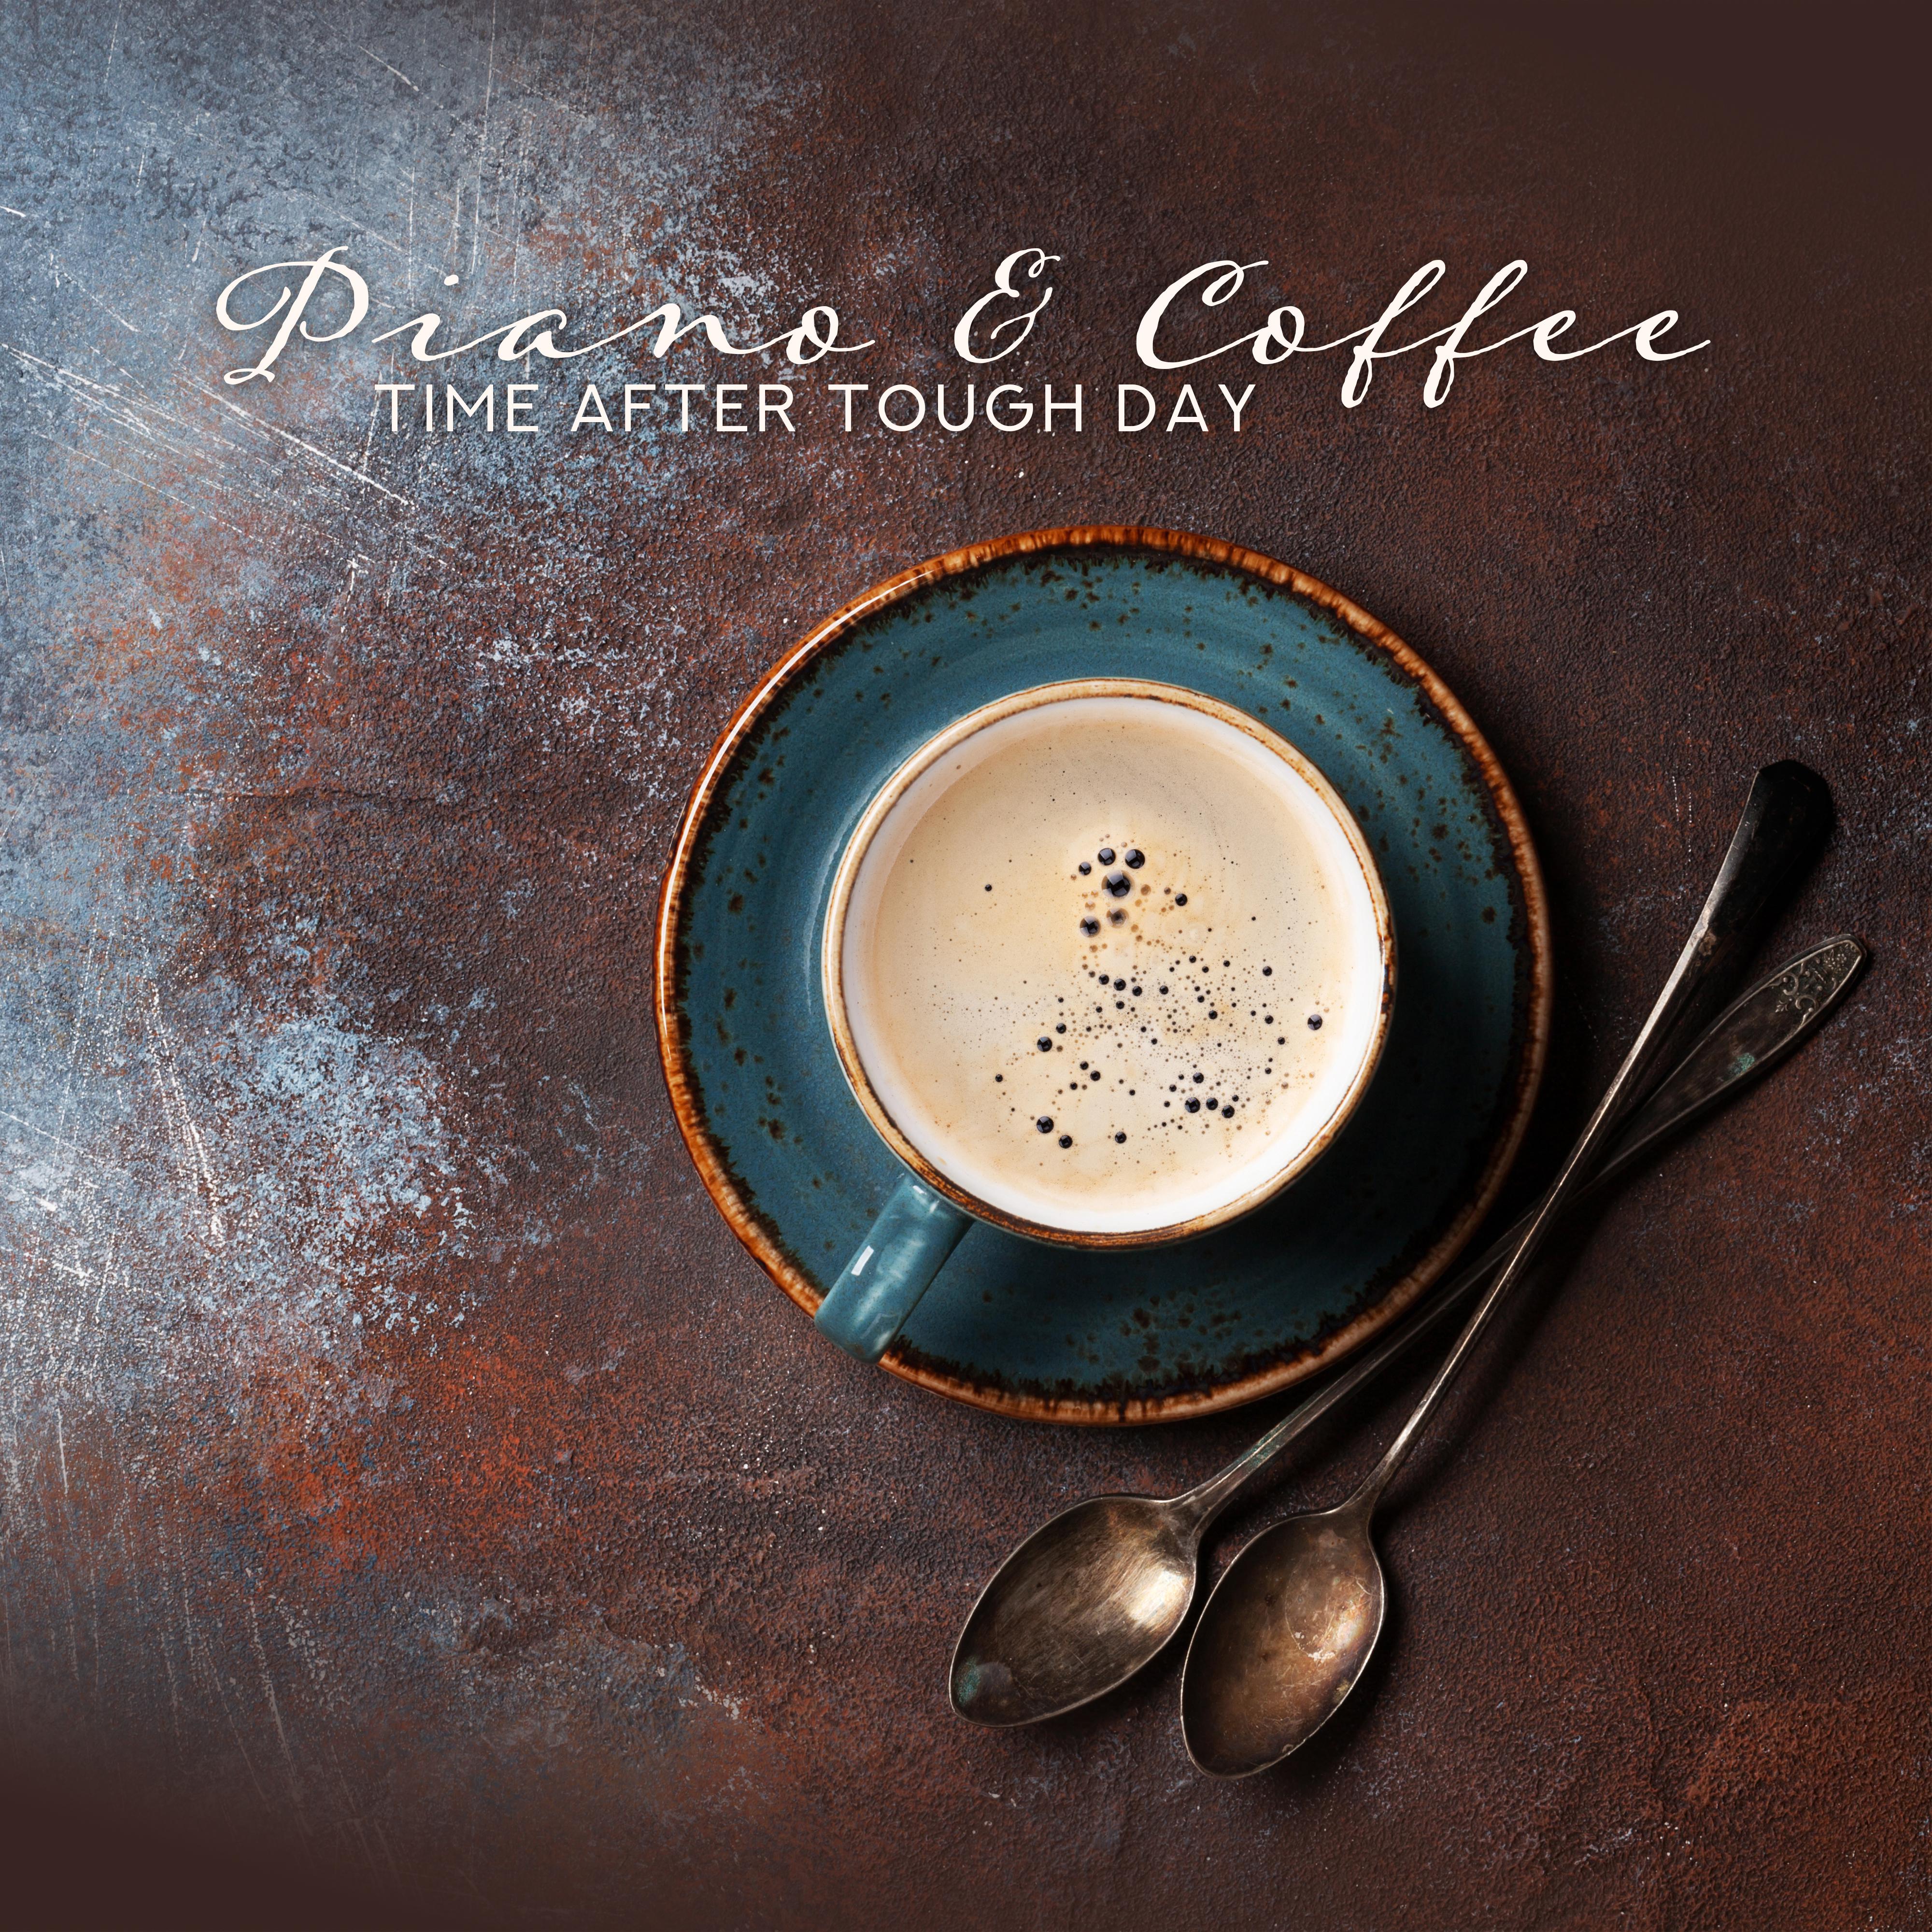 Piano & Coffee Time After Tough Day: 2019 Piano Instrumental Songs for Afternoon Relaxing, Calming Down, Stress Reducing Music